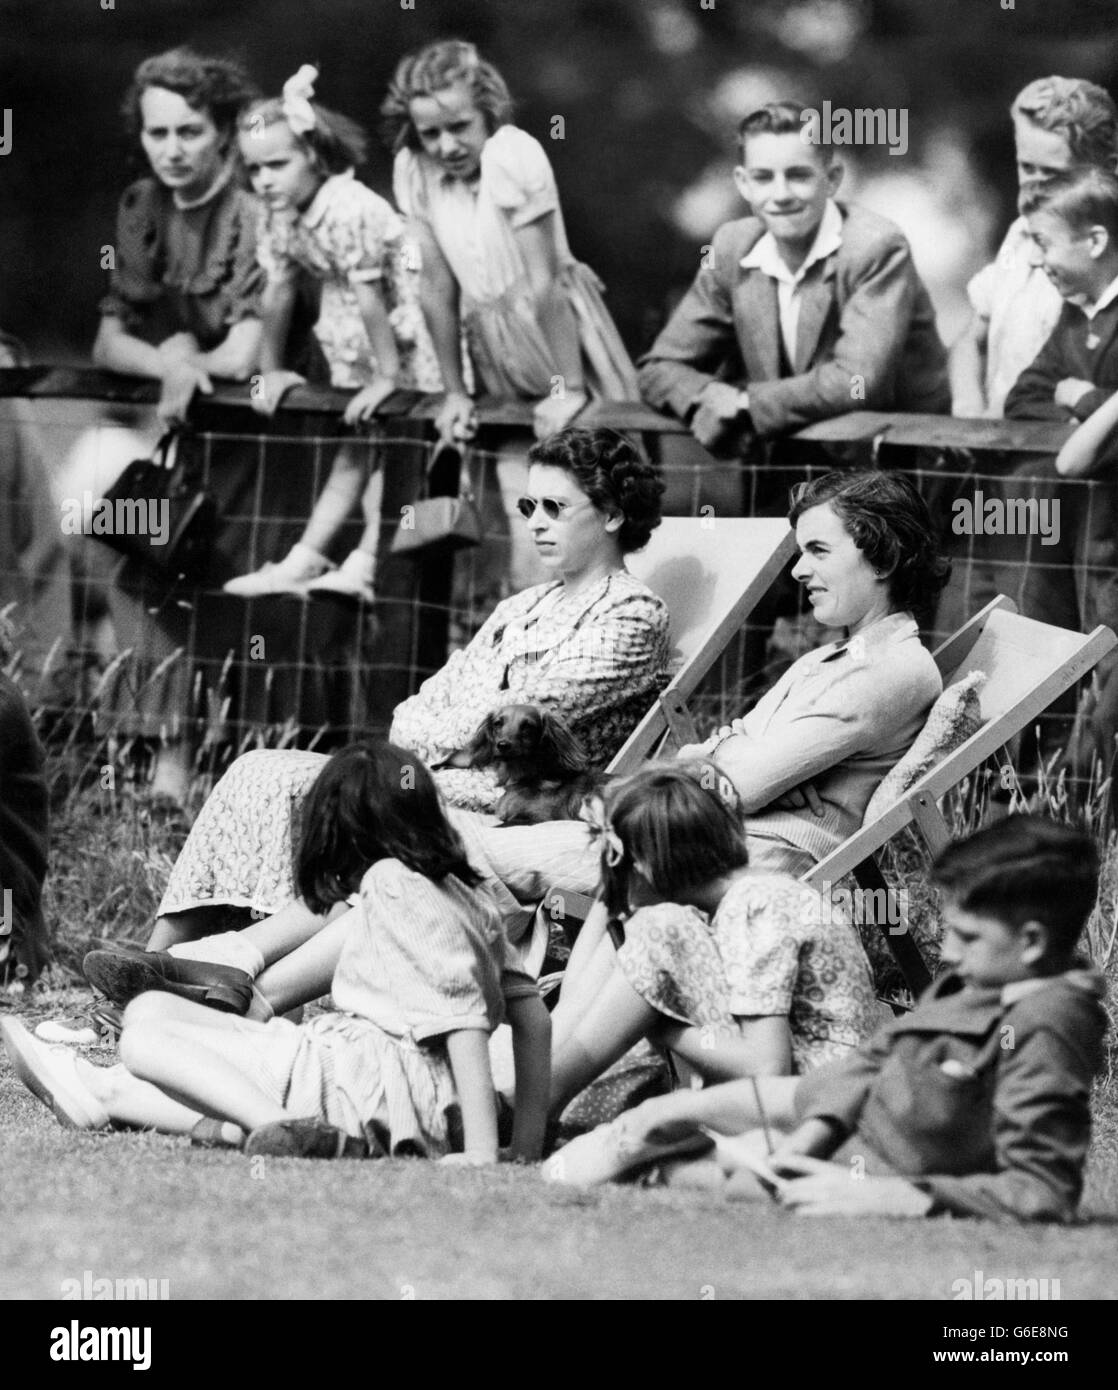 Interested spectators in deck chairs at the village cricket ground of Mersham-le-Hatch, near Ashford, Kent, are Princess Elizabeth (left) and Lady Brabourne. They are watching their husbands play for the Mersham team in a match against the neighbouring village of Aldington. The Duke of Edinburgh had a short innings - he was out leg before wicket off the first ball he received, but when bowling himself he took two wickets. Lord Brabourne was Mersham's wicket-keeper. The Princess and the Duke are spending the week-end as guests of Lord and Lady Brabourns at Mersham. Stock Photo